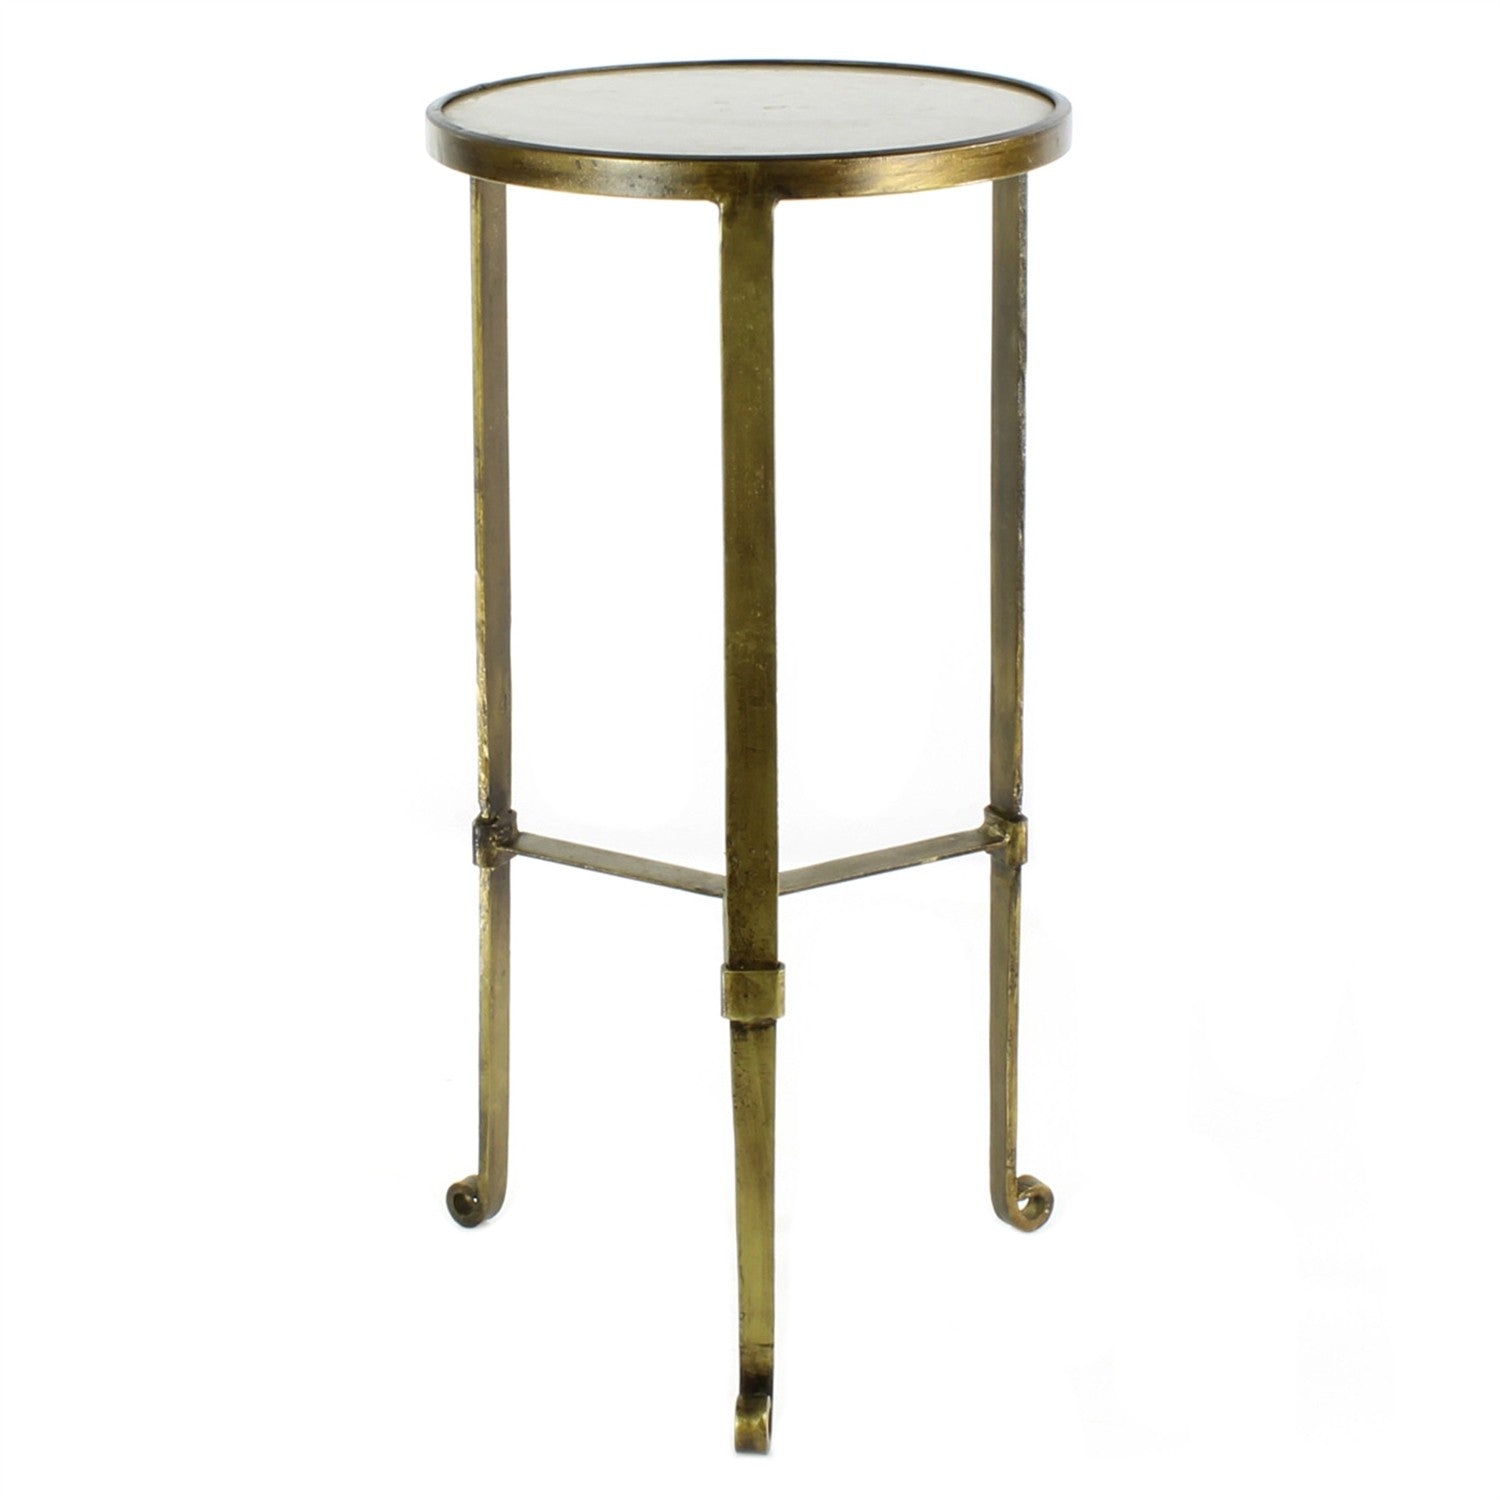 24" Brass Iron Square End Table